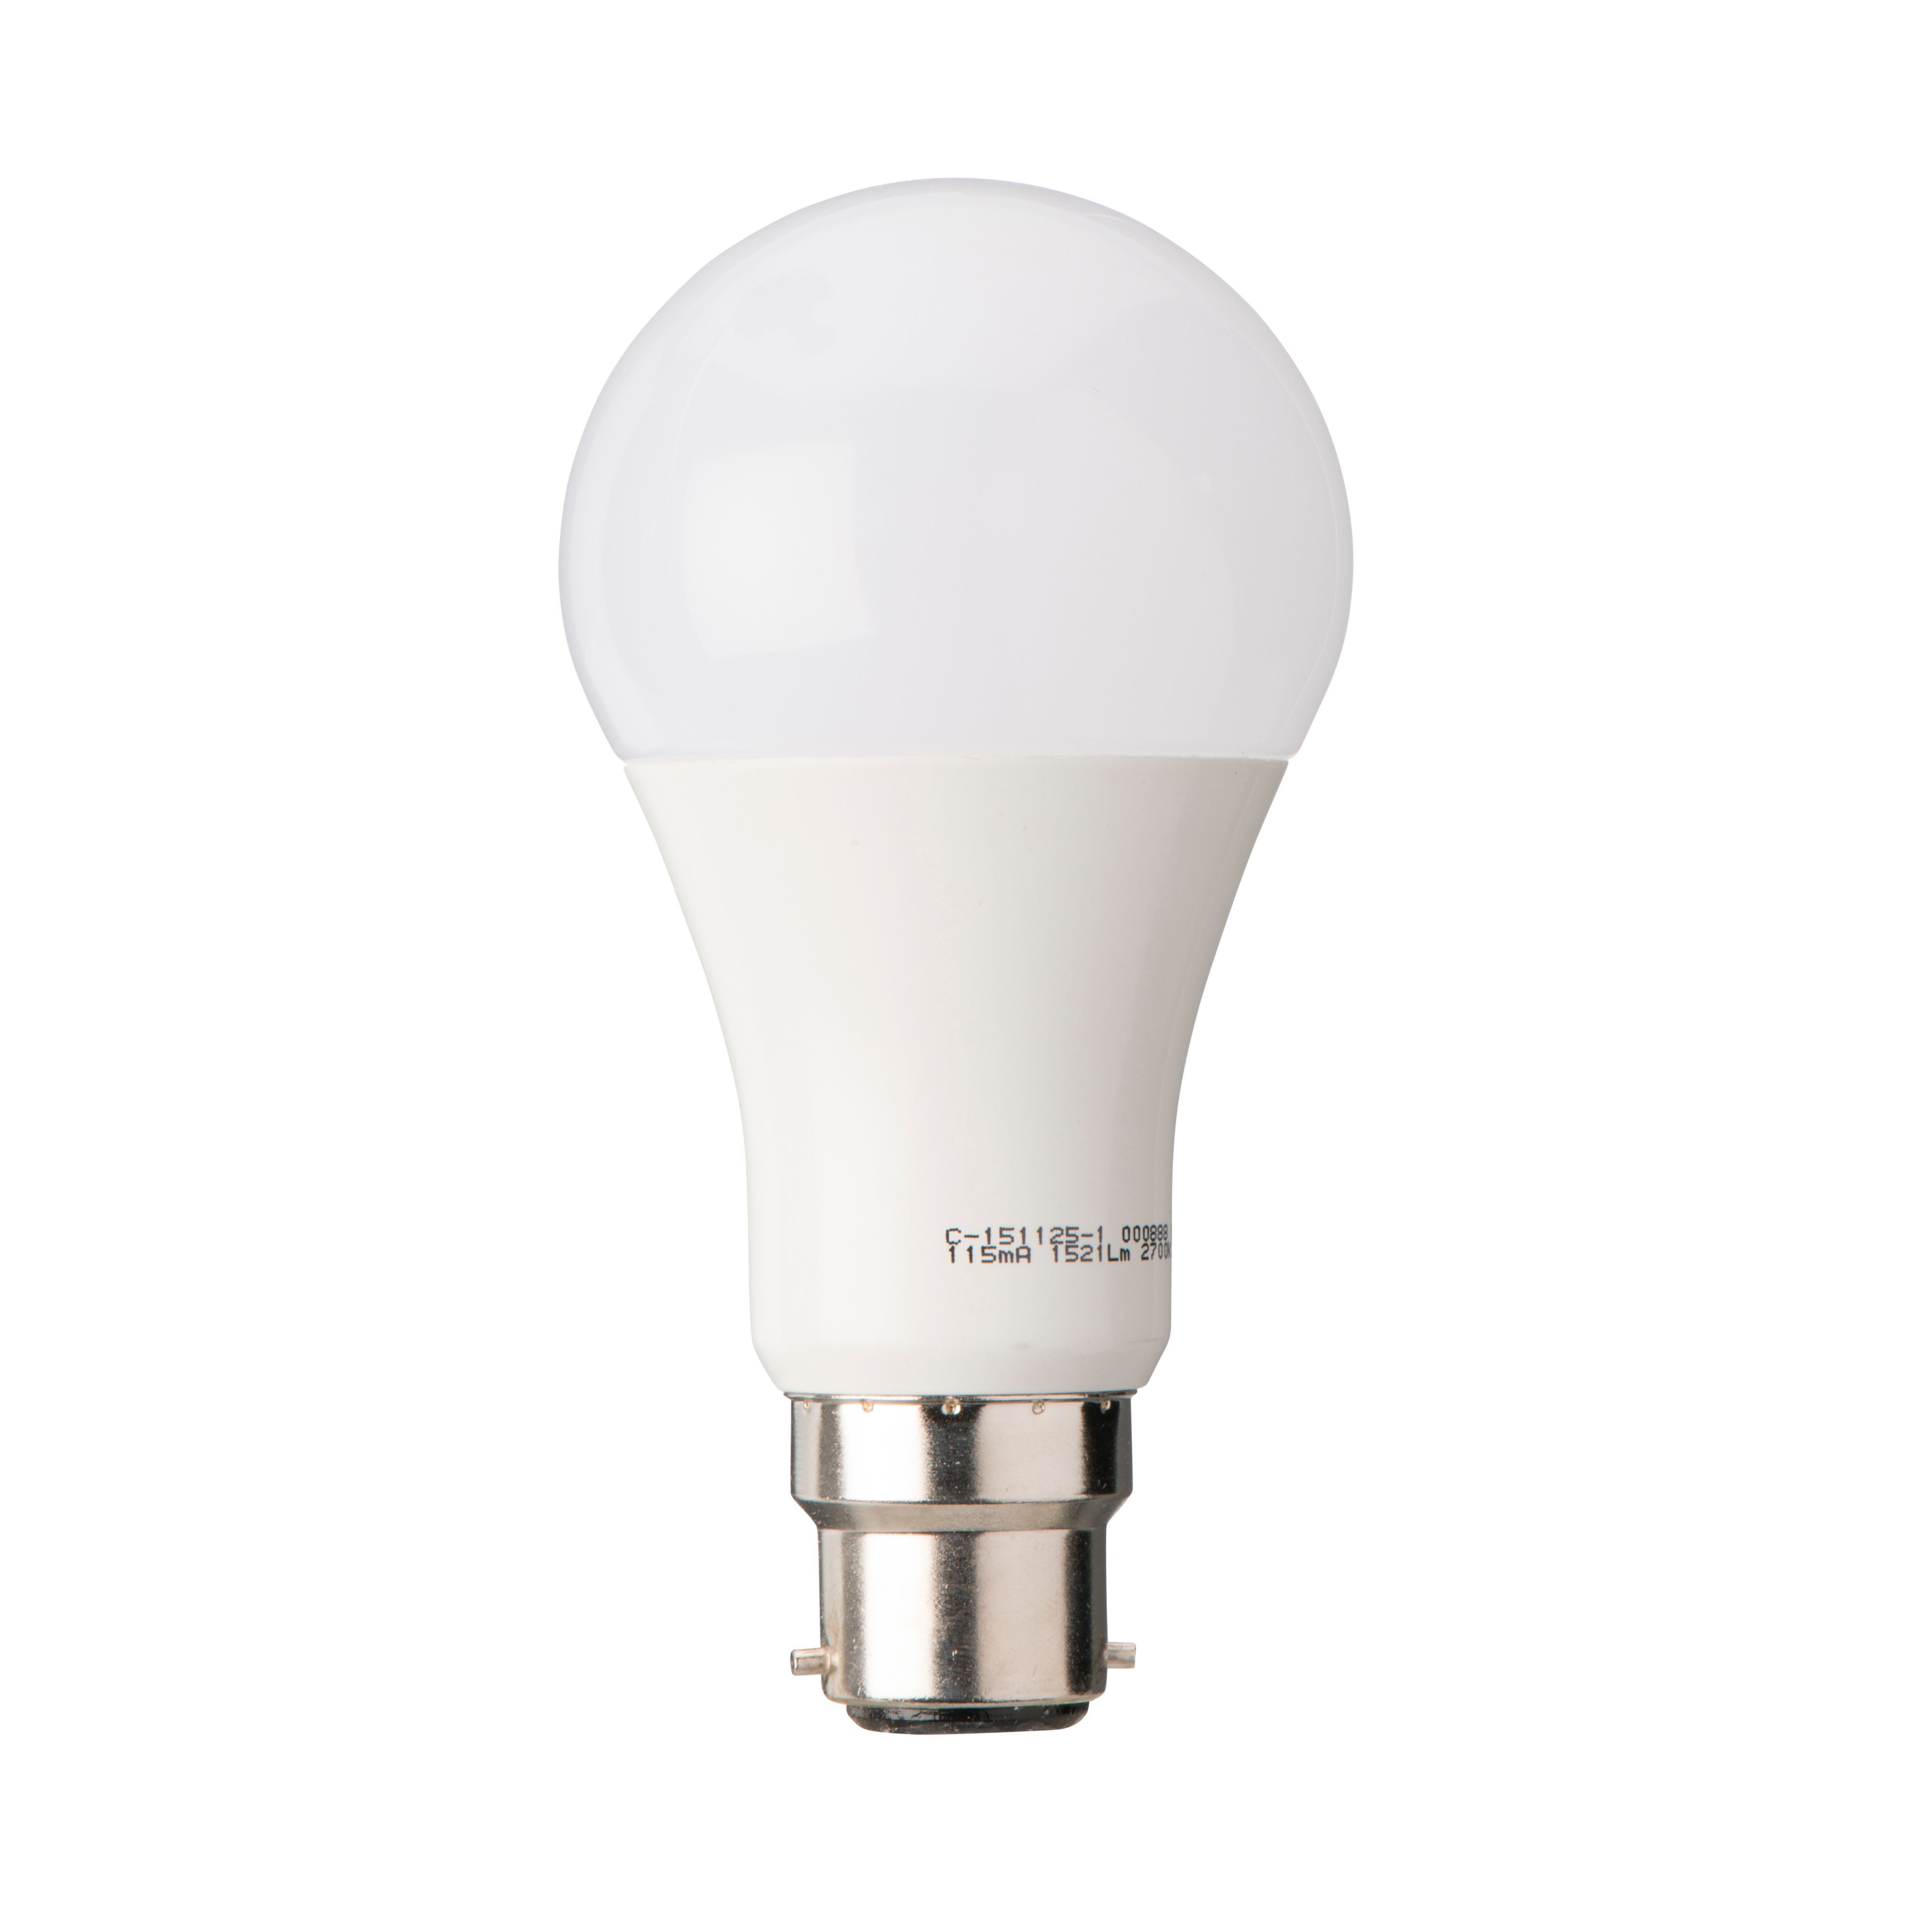 Diall E27 14.5W 1521lm Classic LED Dimmable Light bulb